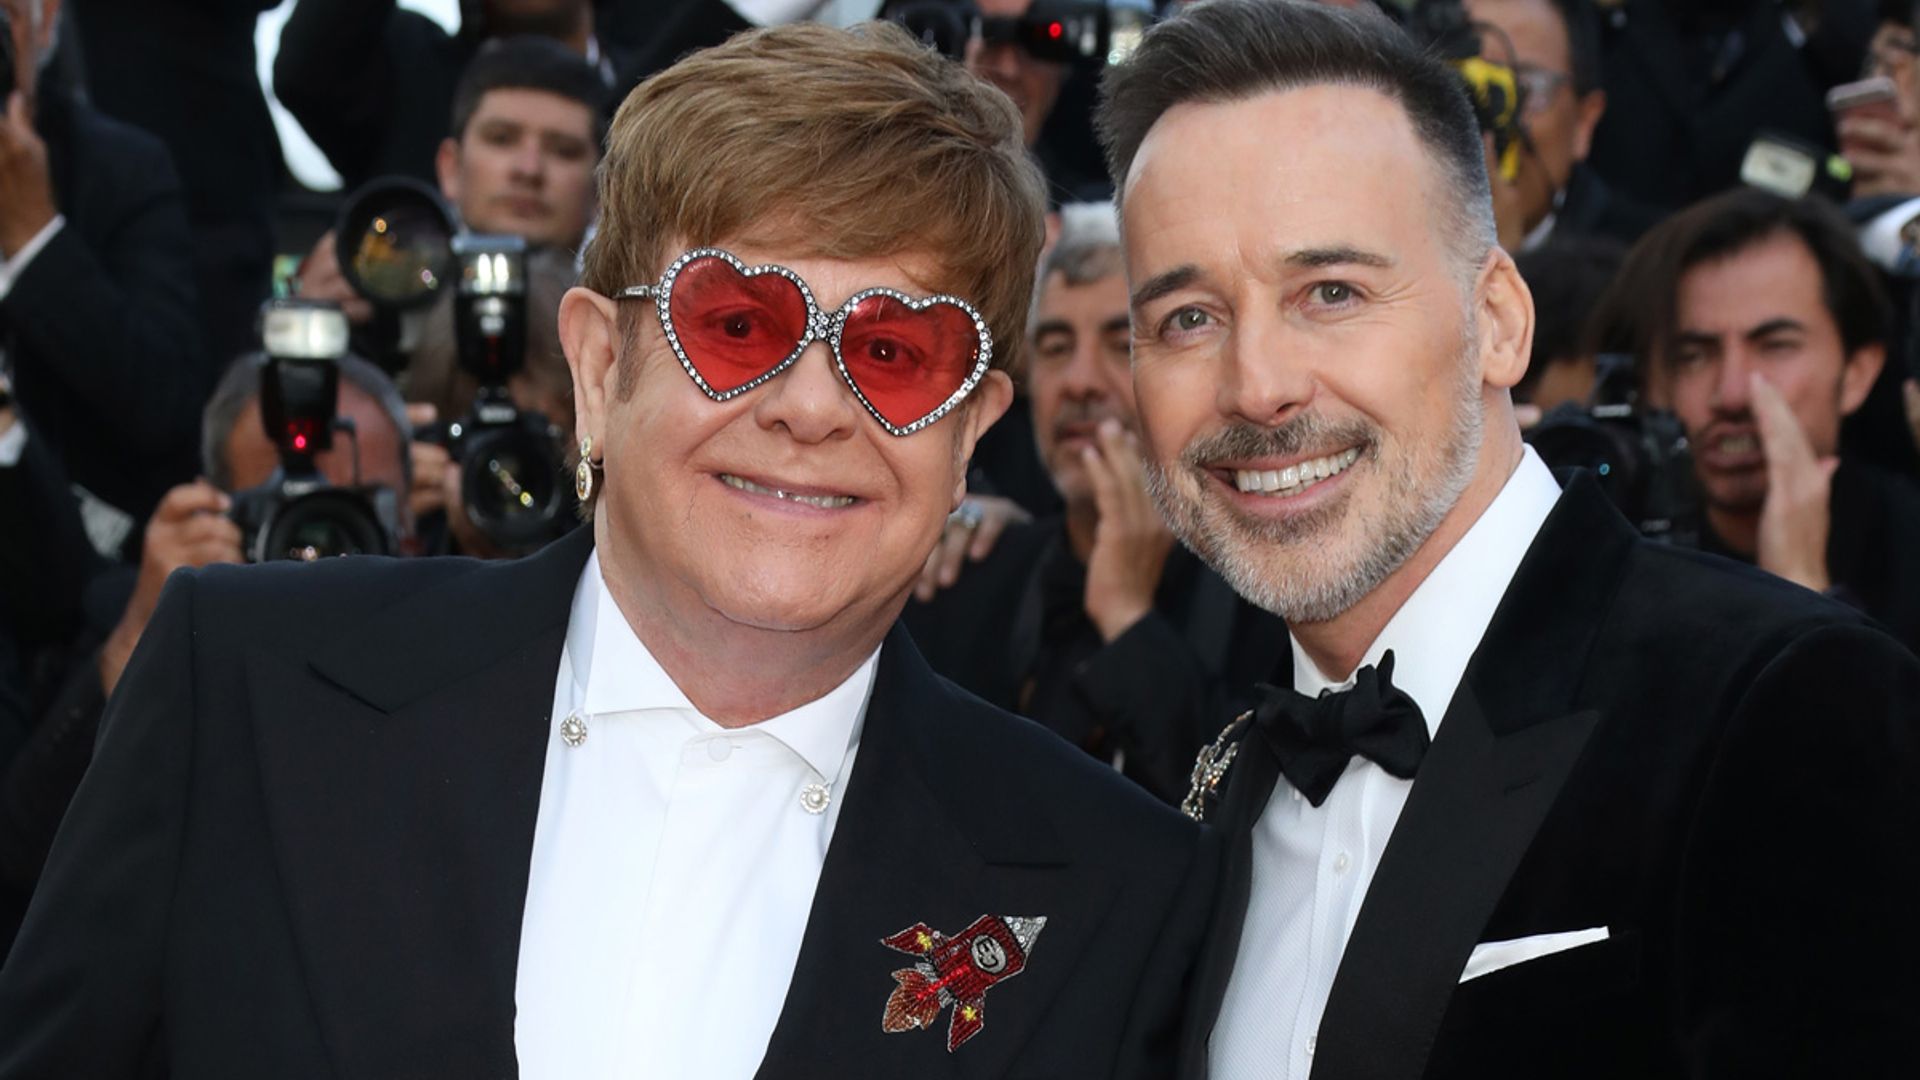 Sir Elton John and David Furnish appear in incredible photo with their sons  fans react